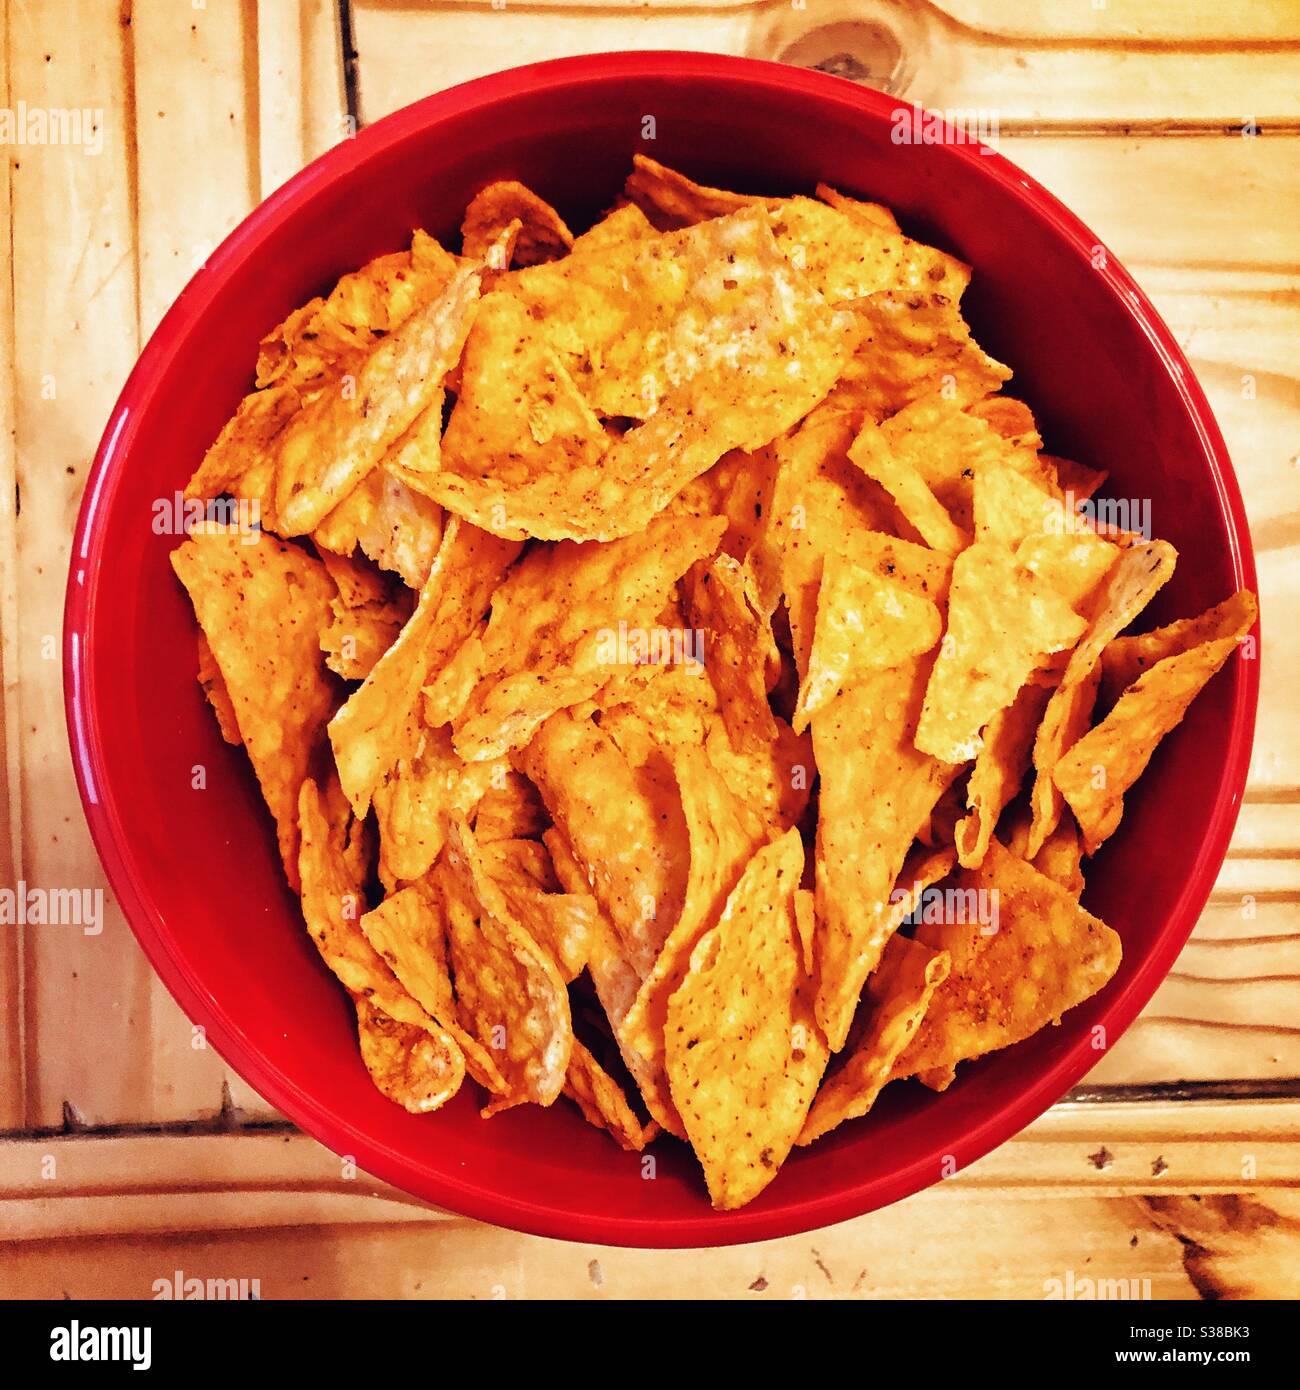 Nacho cheese Doritos in a red bowl on wooden table Stock Photo